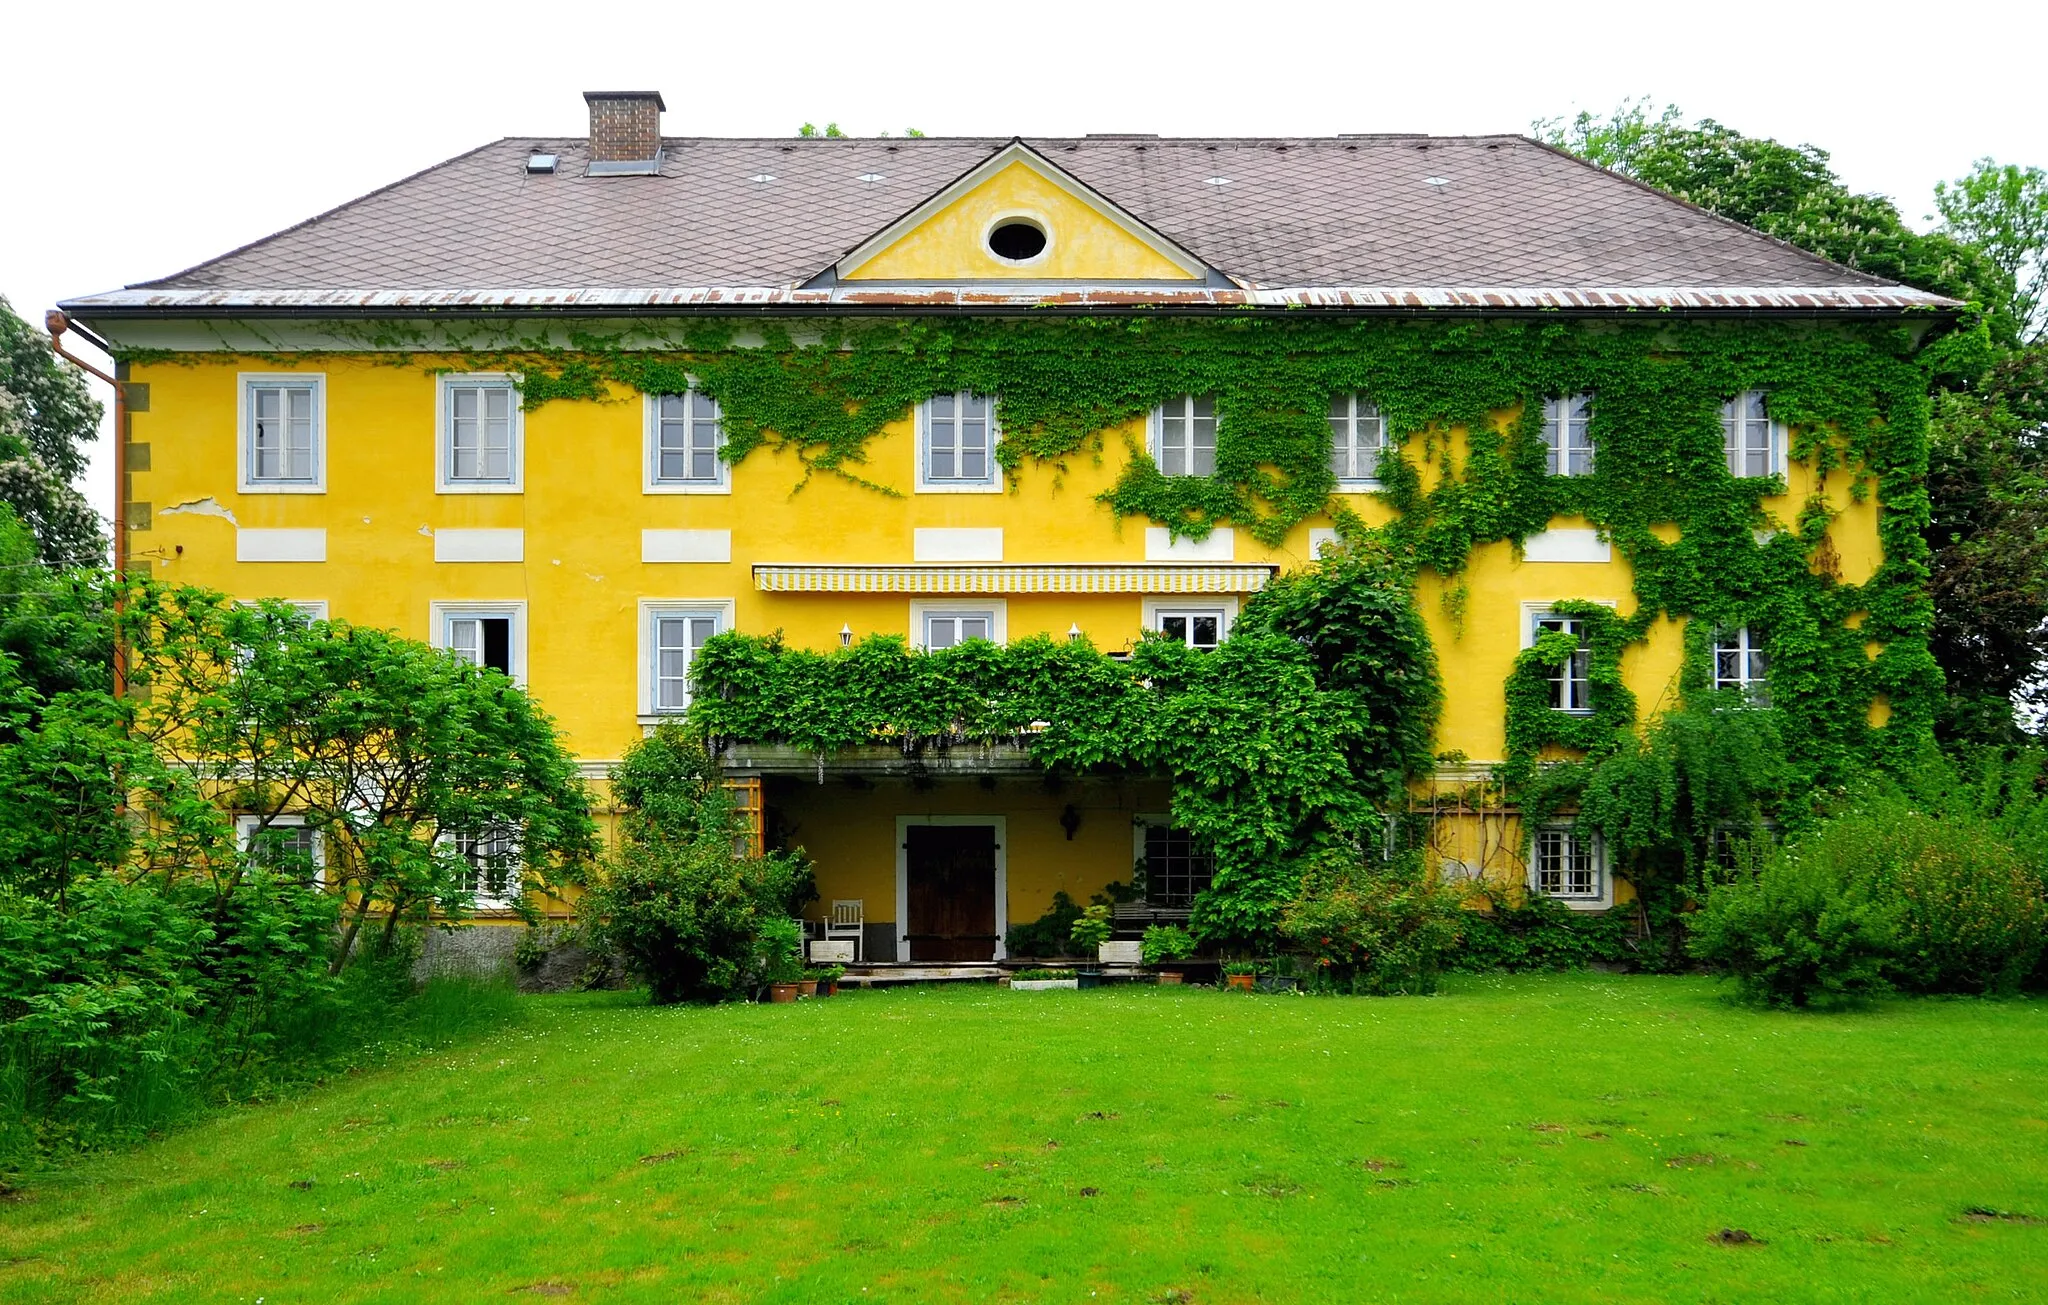 Photo showing: Manor-house "Farchernhof" on the Farchernhofweg #74, situated in the 15th district “Hörtendorf” of the Carinthian capital Klagenfurt on the Lake Woerth, Carinthia, Austria